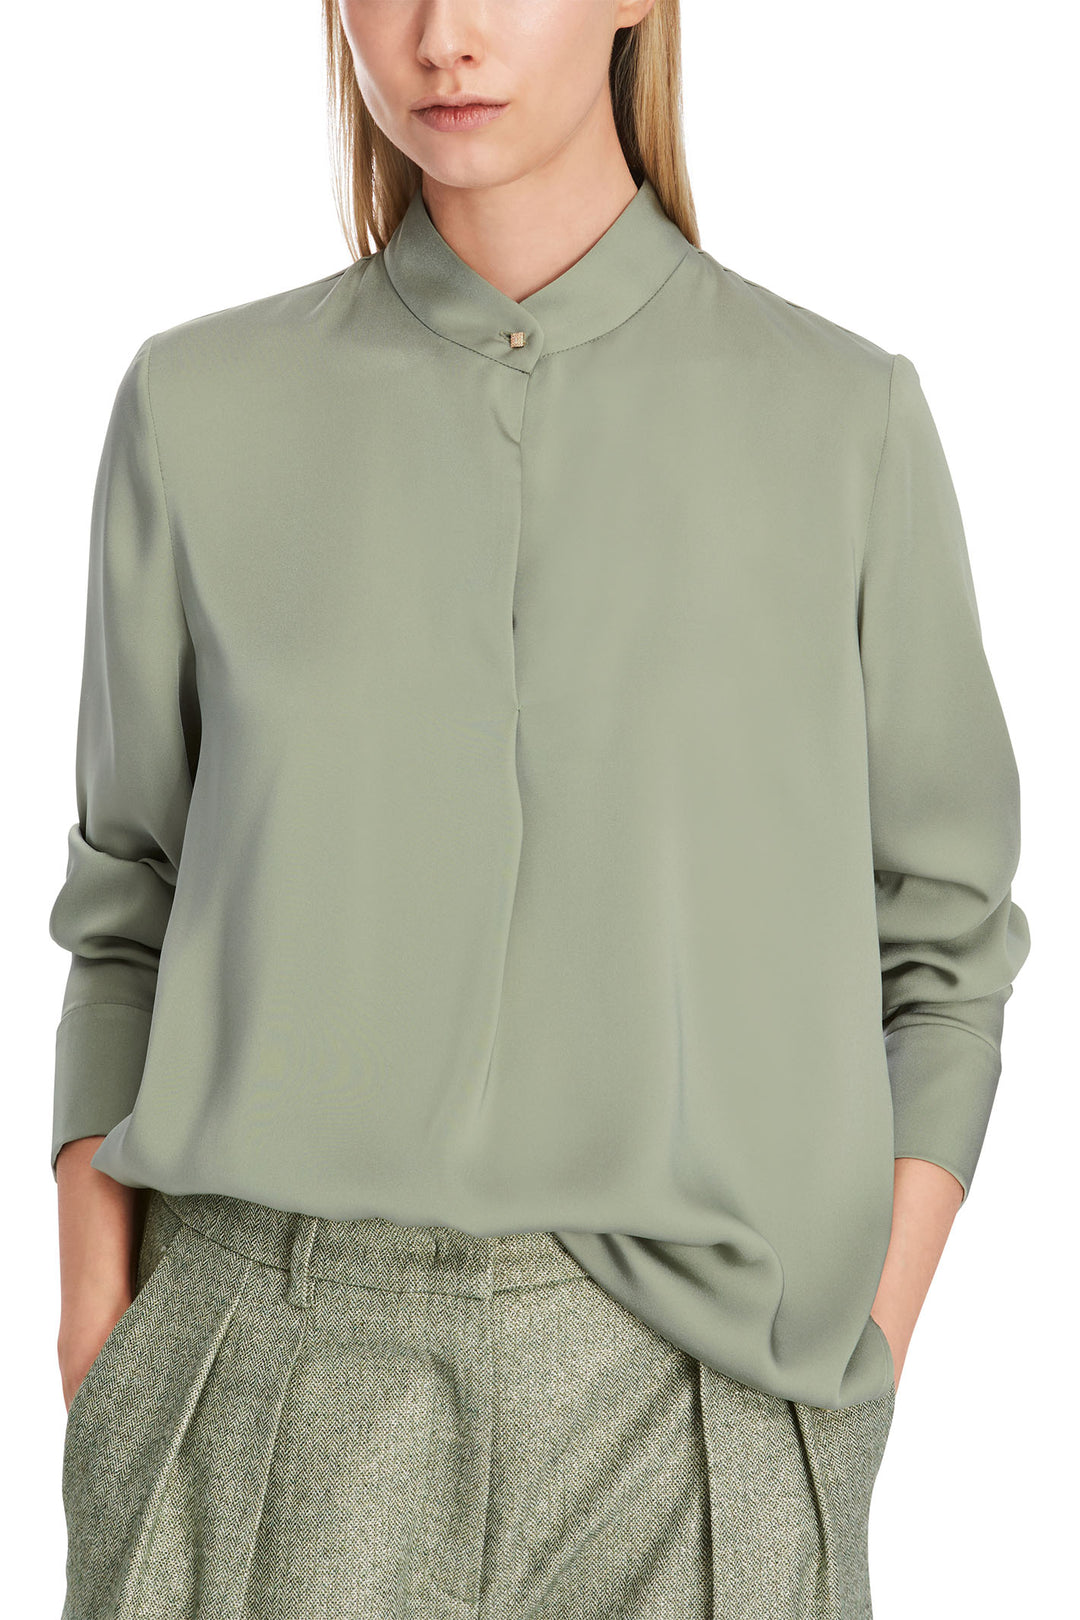 Marc Cain Collection XC 51.22 W08 Frozen Sage Green Blouse - Olivia Grace Fashion